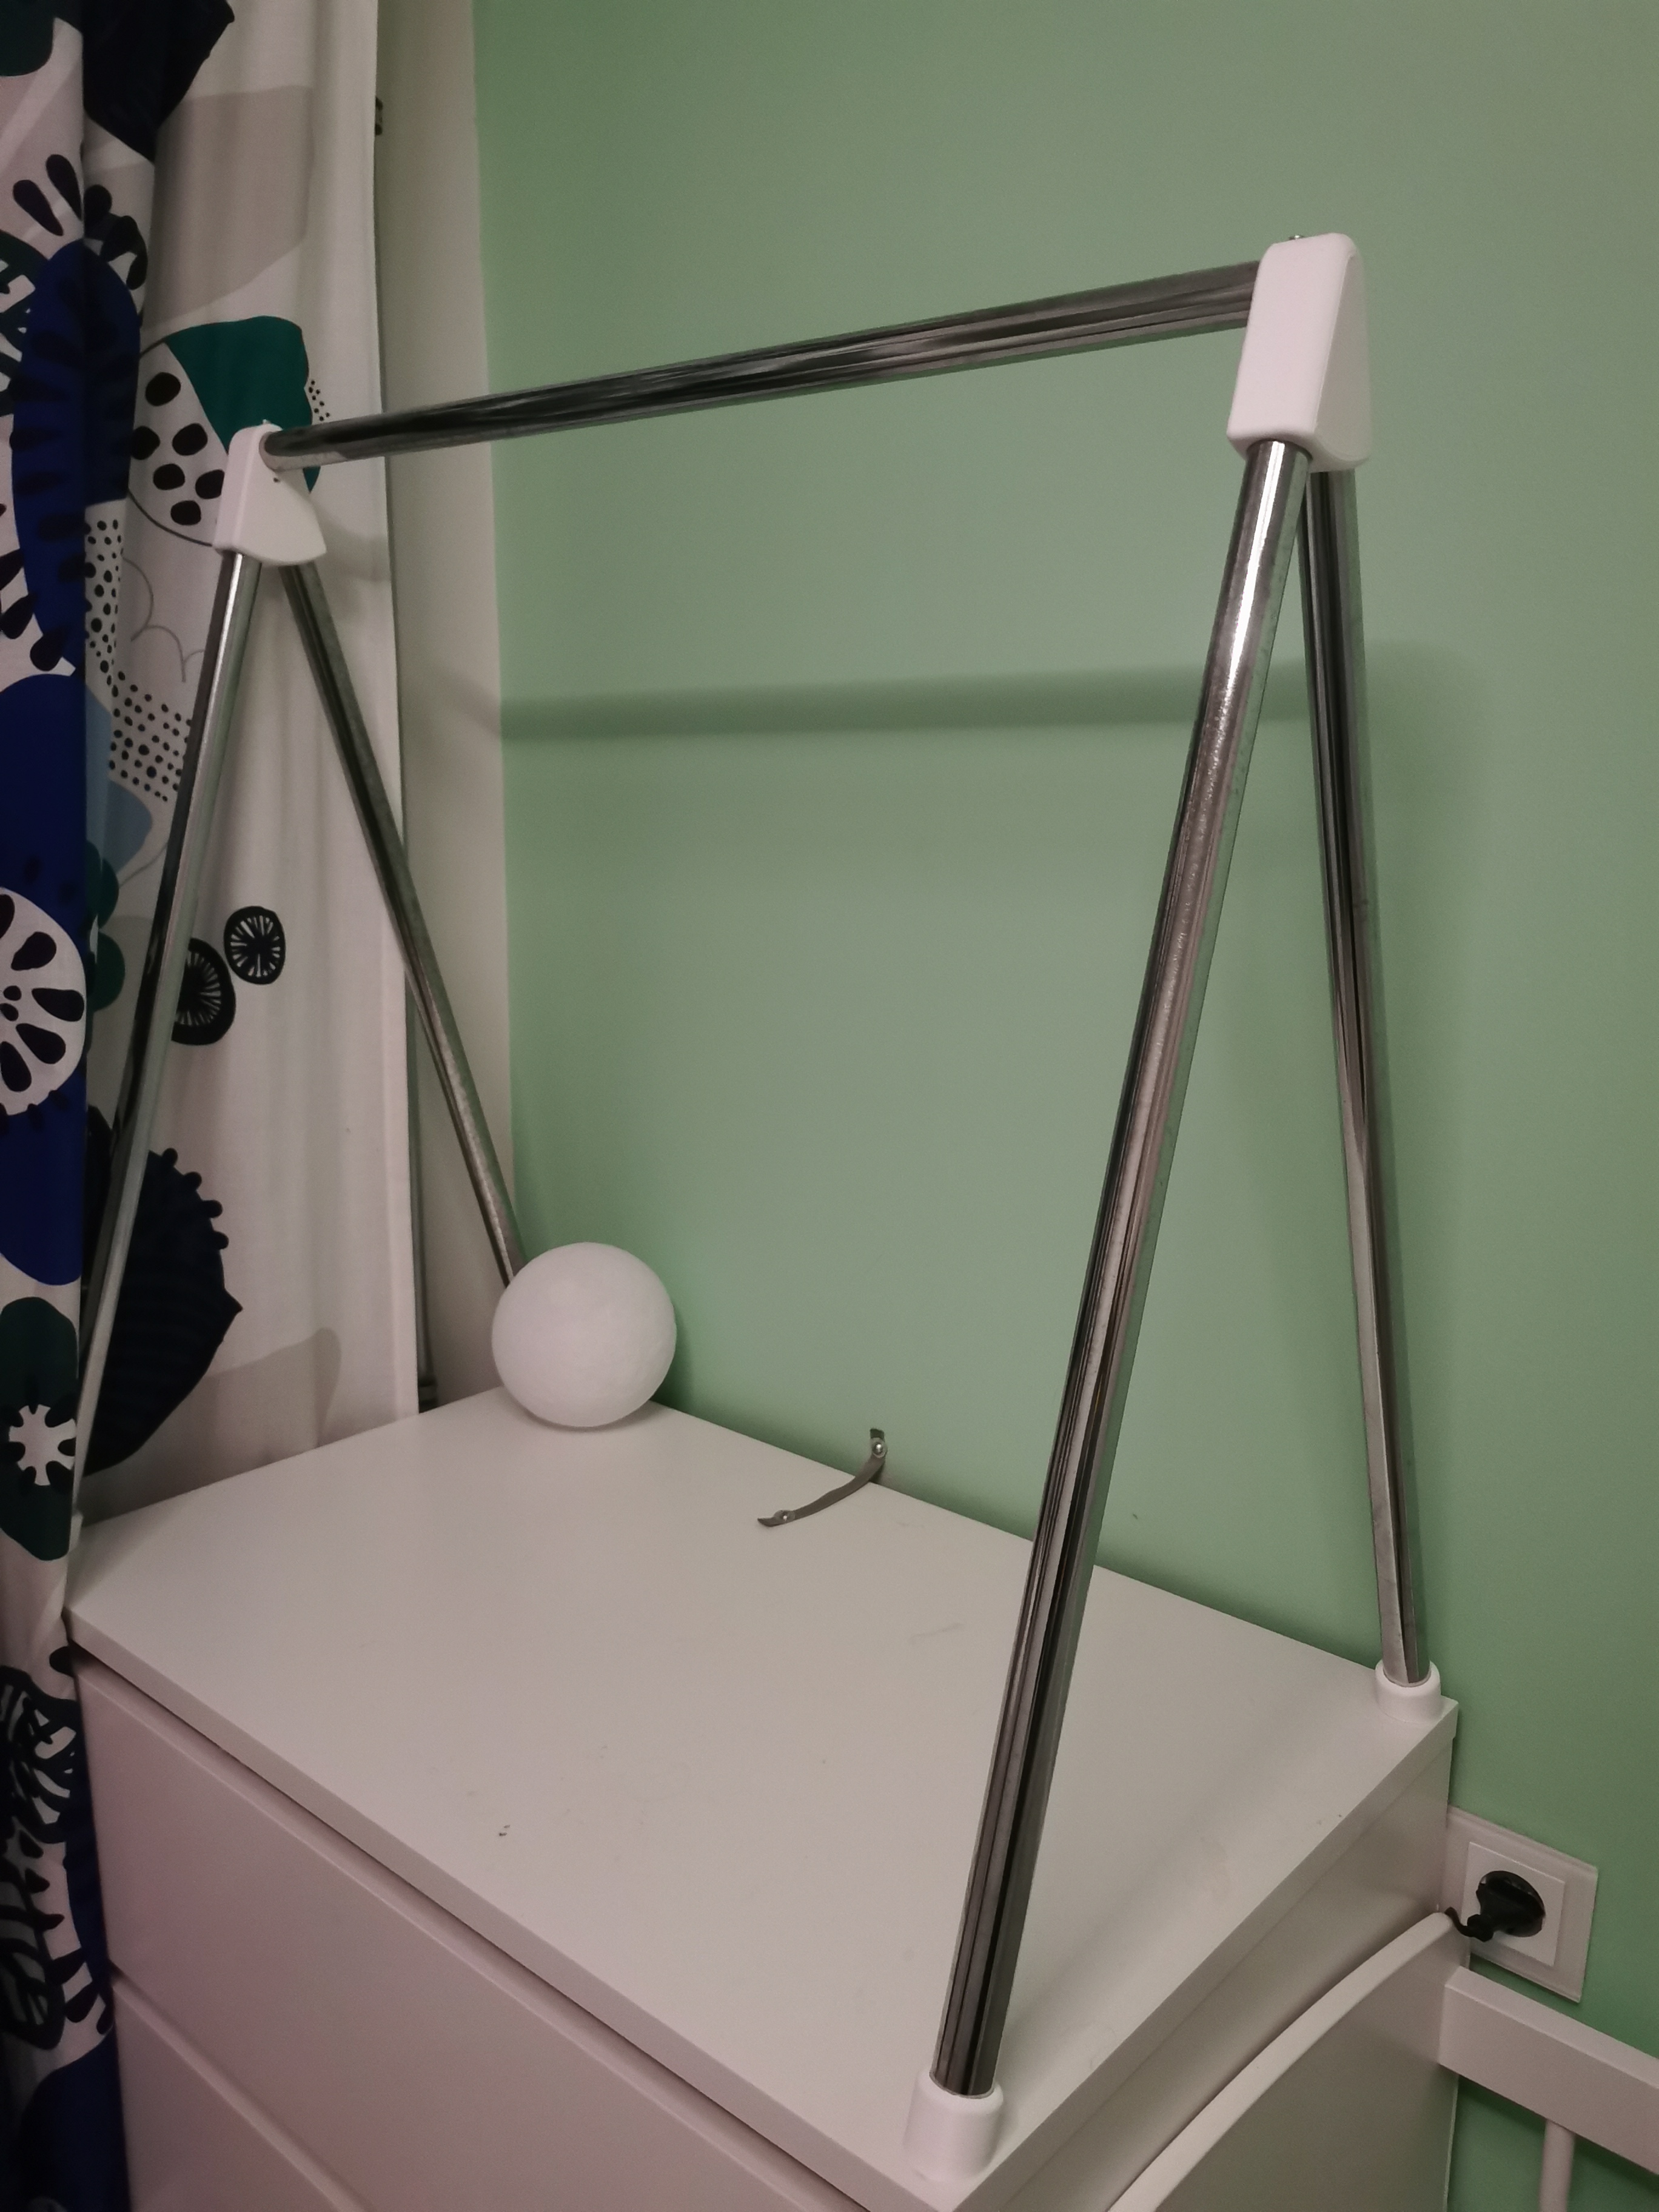 Clothes hanger stand